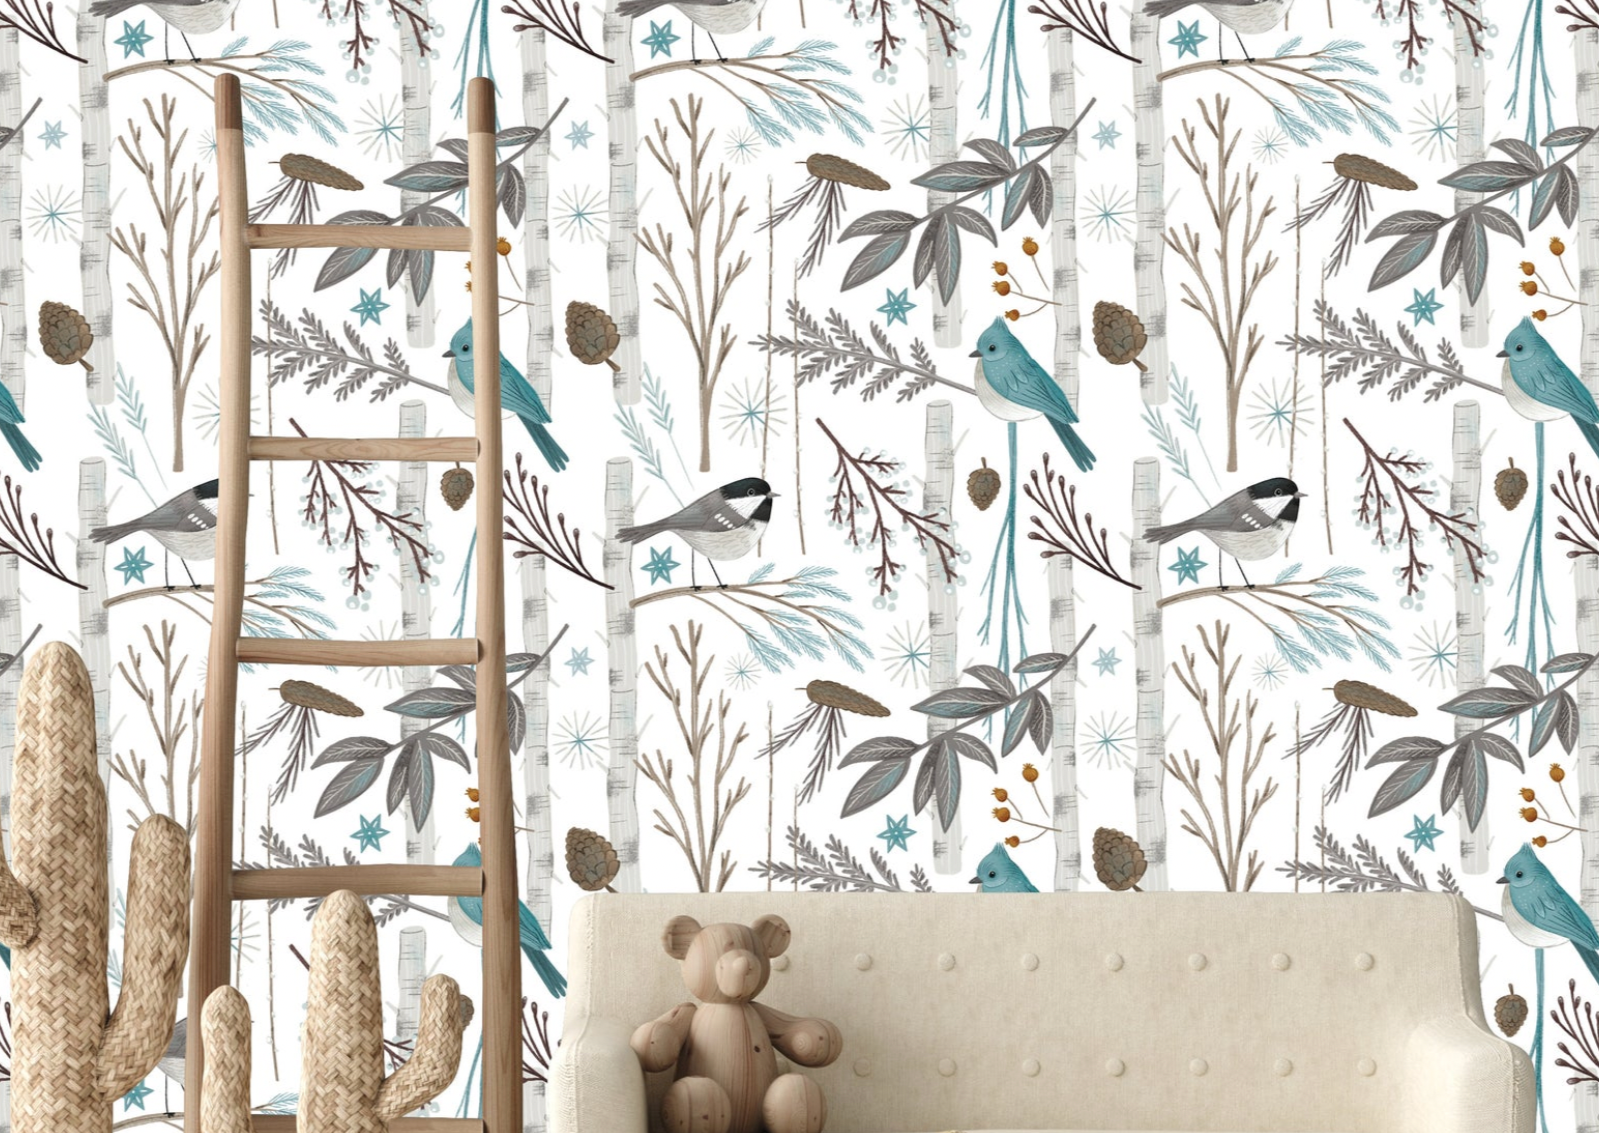 Charcoal Bamboo and Birds - Nursery Wall Decor Wallpapers